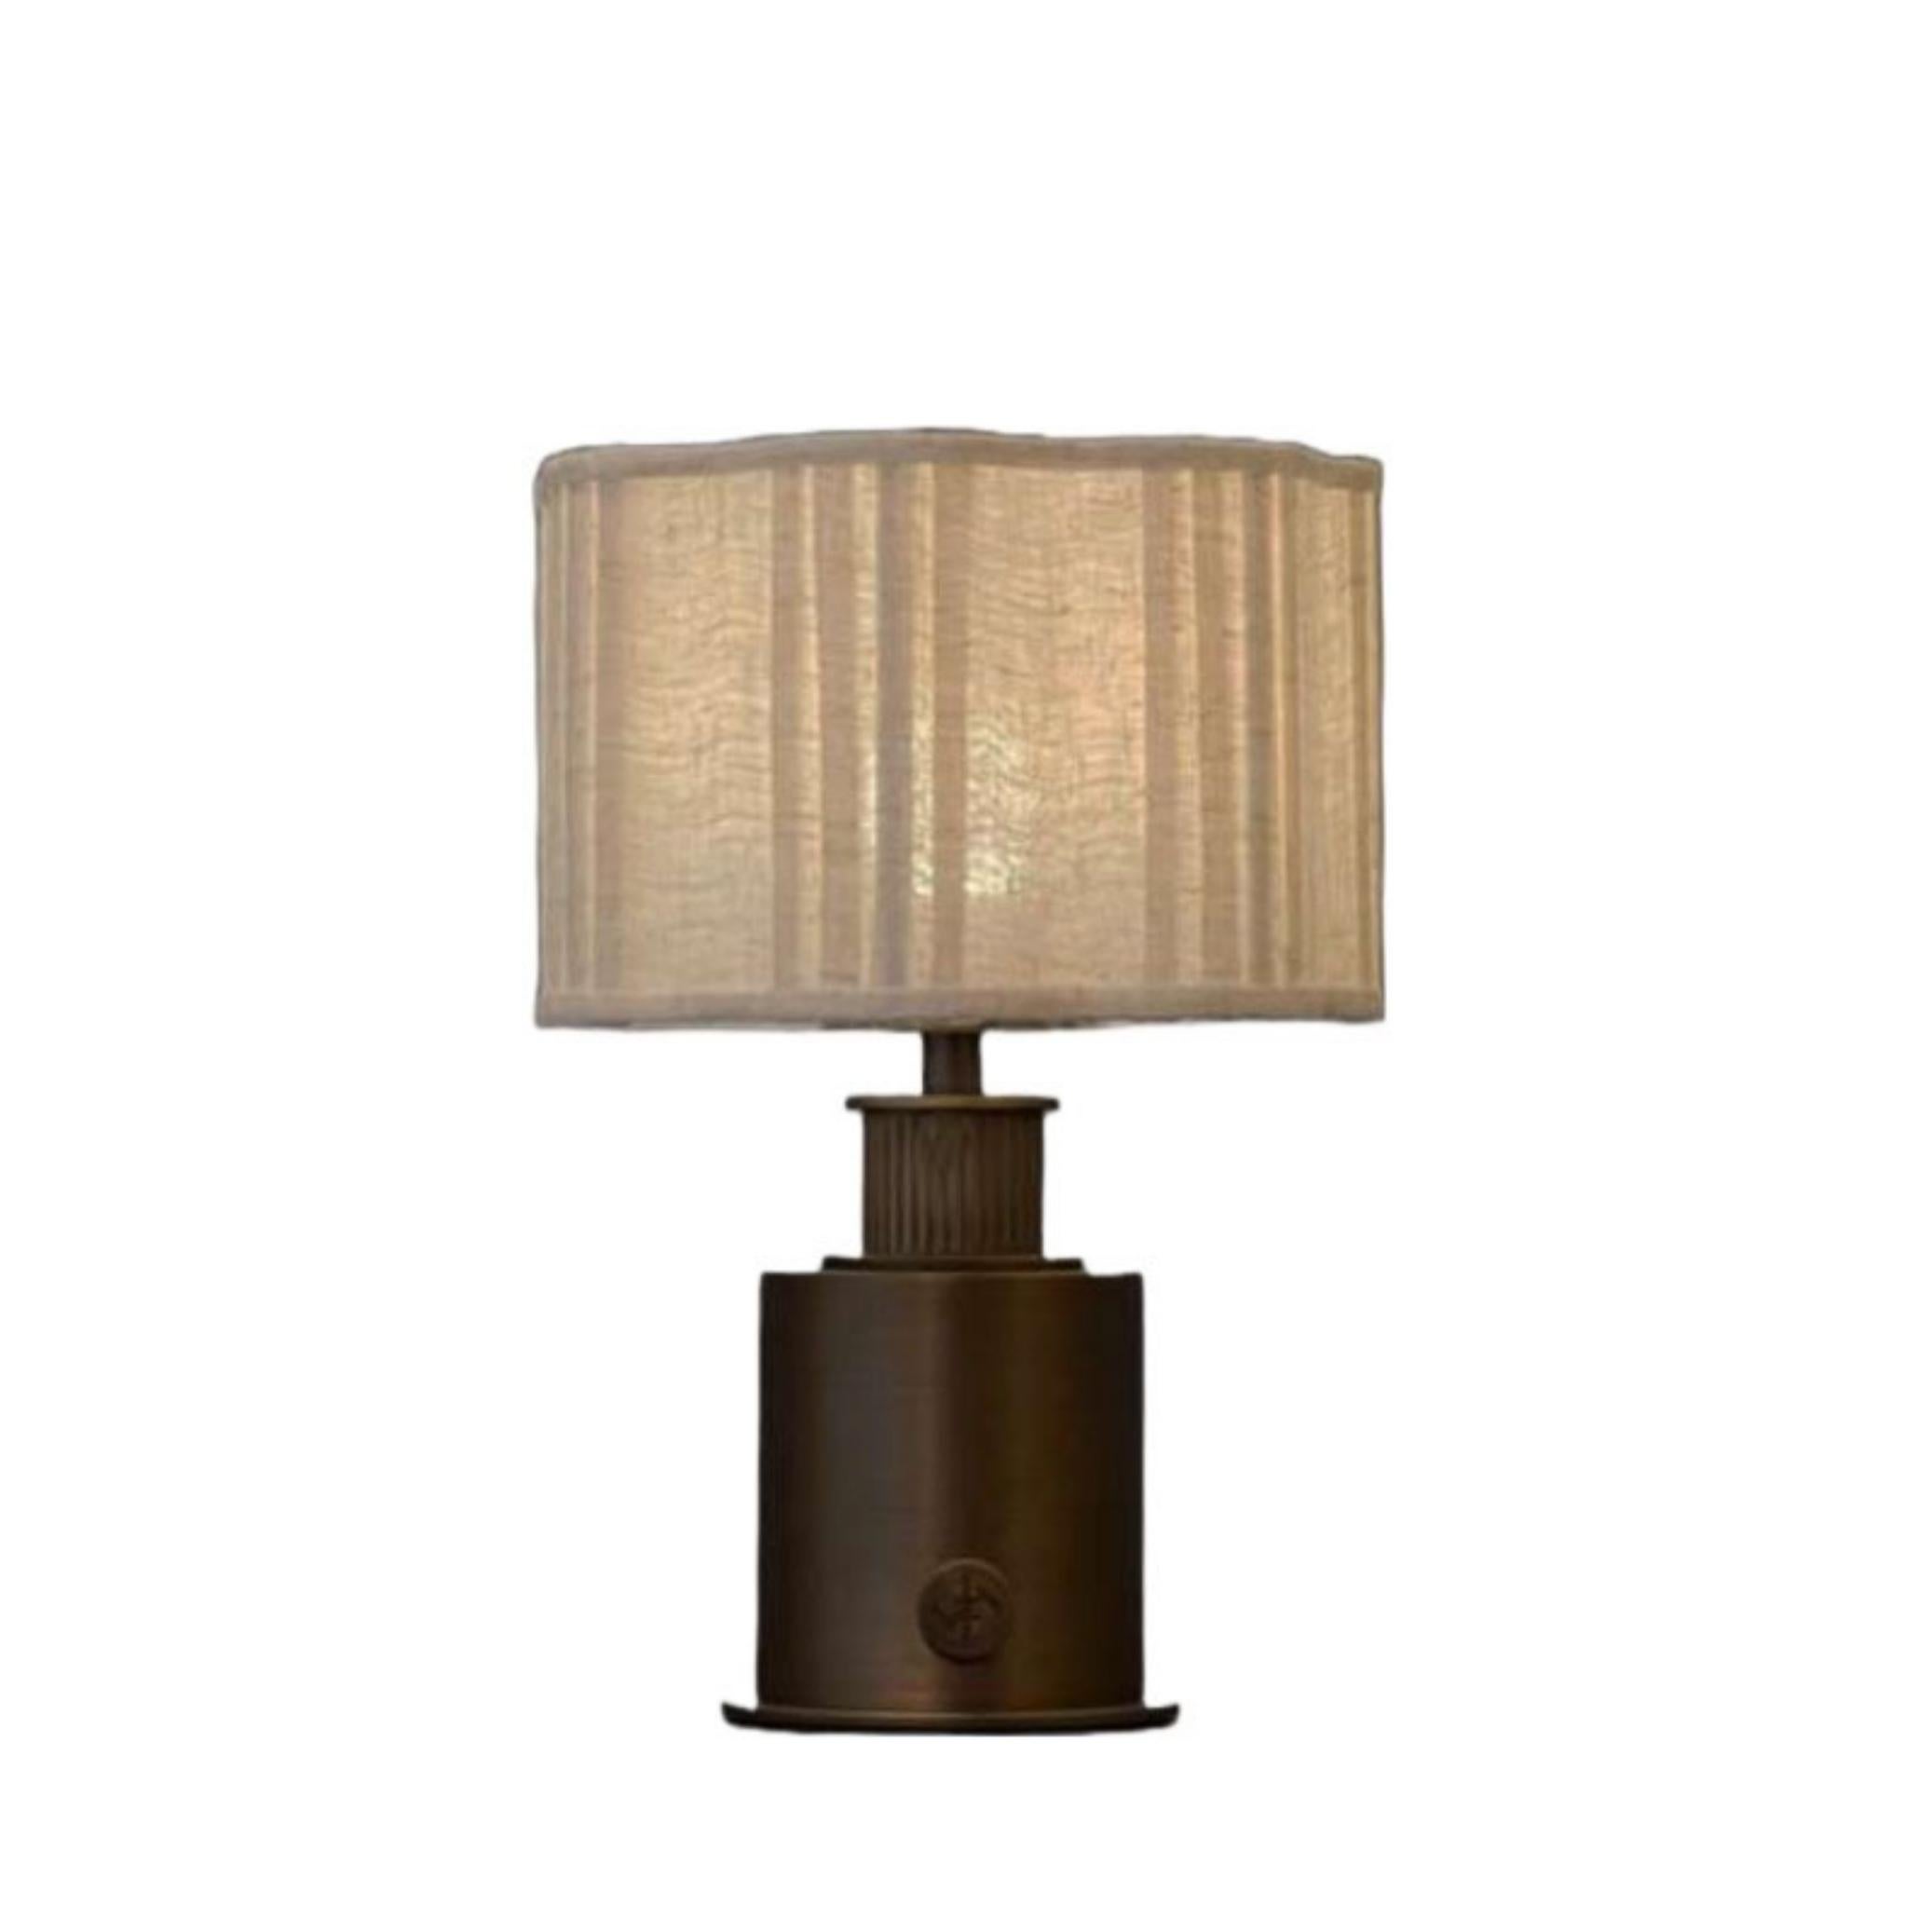 The Camellia Portable LED Lamp in Glass and Bronze by André Fu Living Neuf - En vente à Admiralty, HK